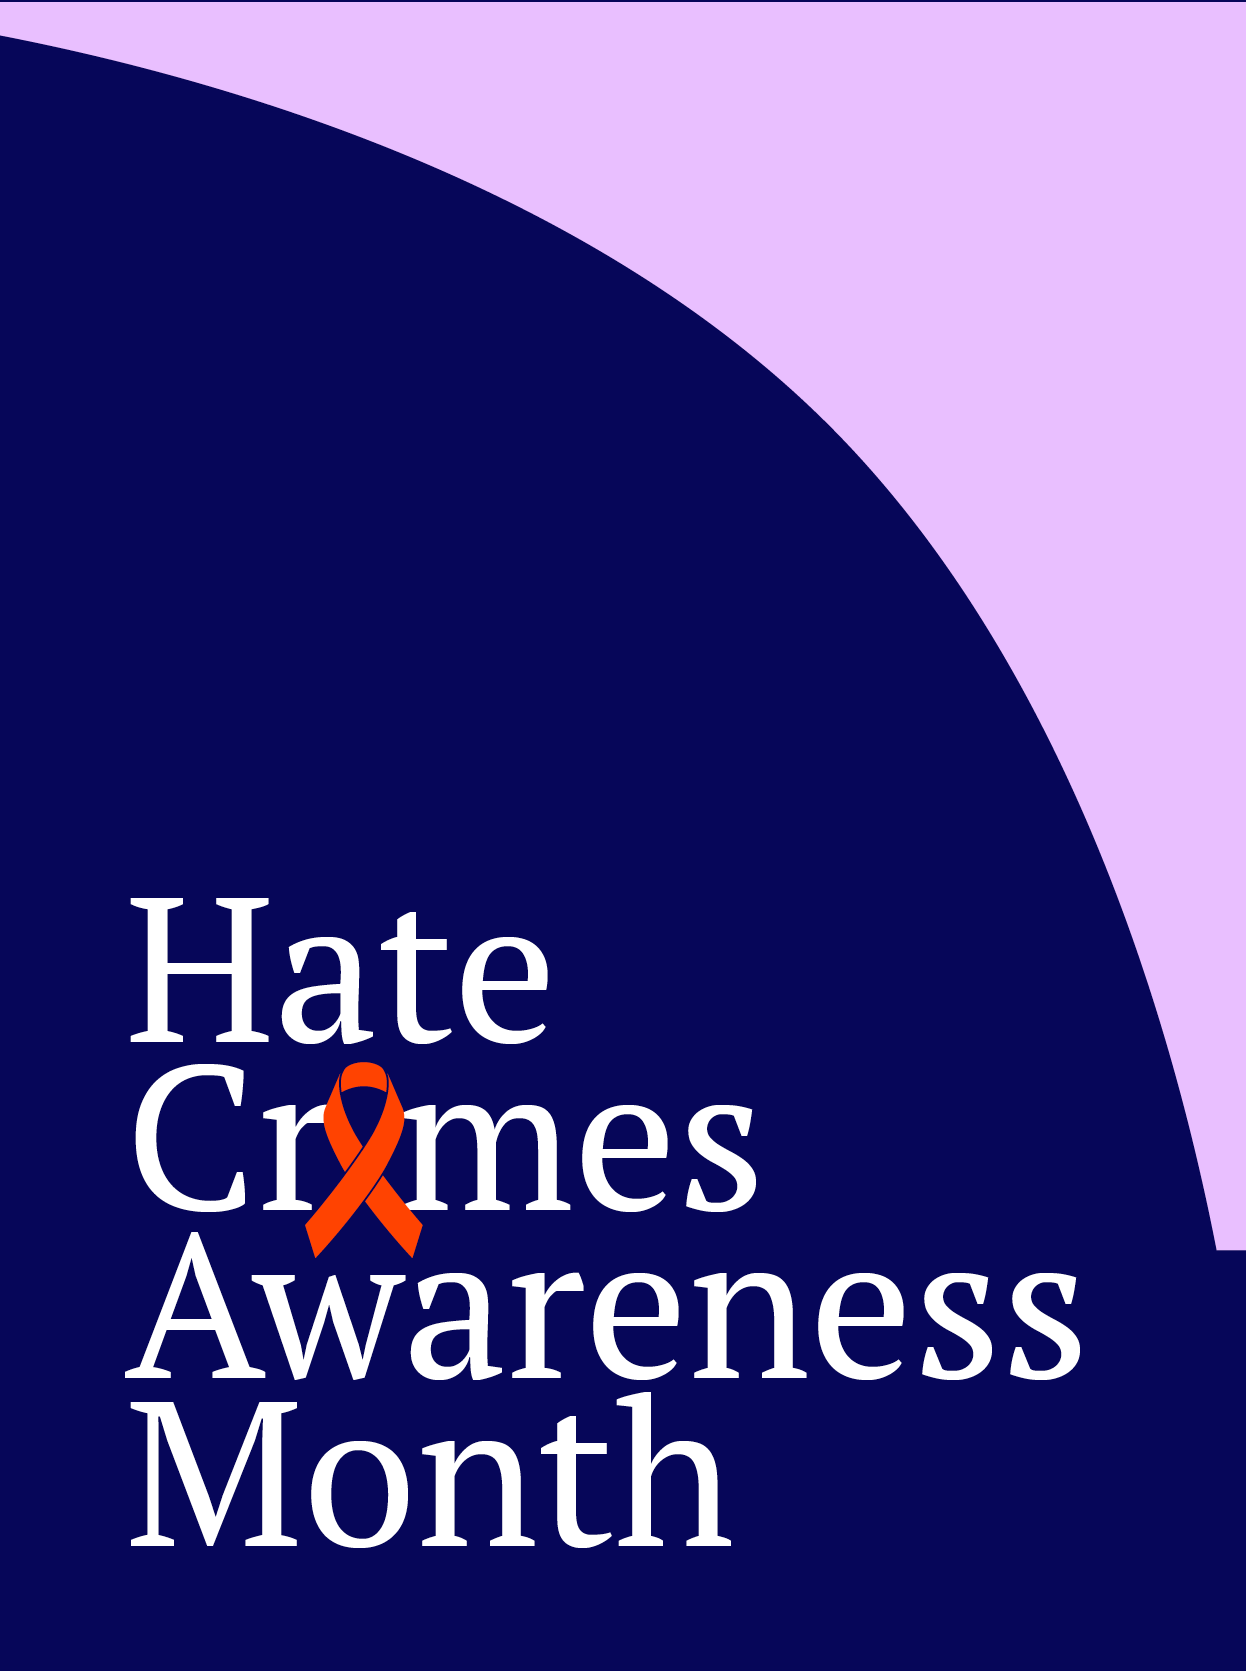 Hate Crimes Awareness Month